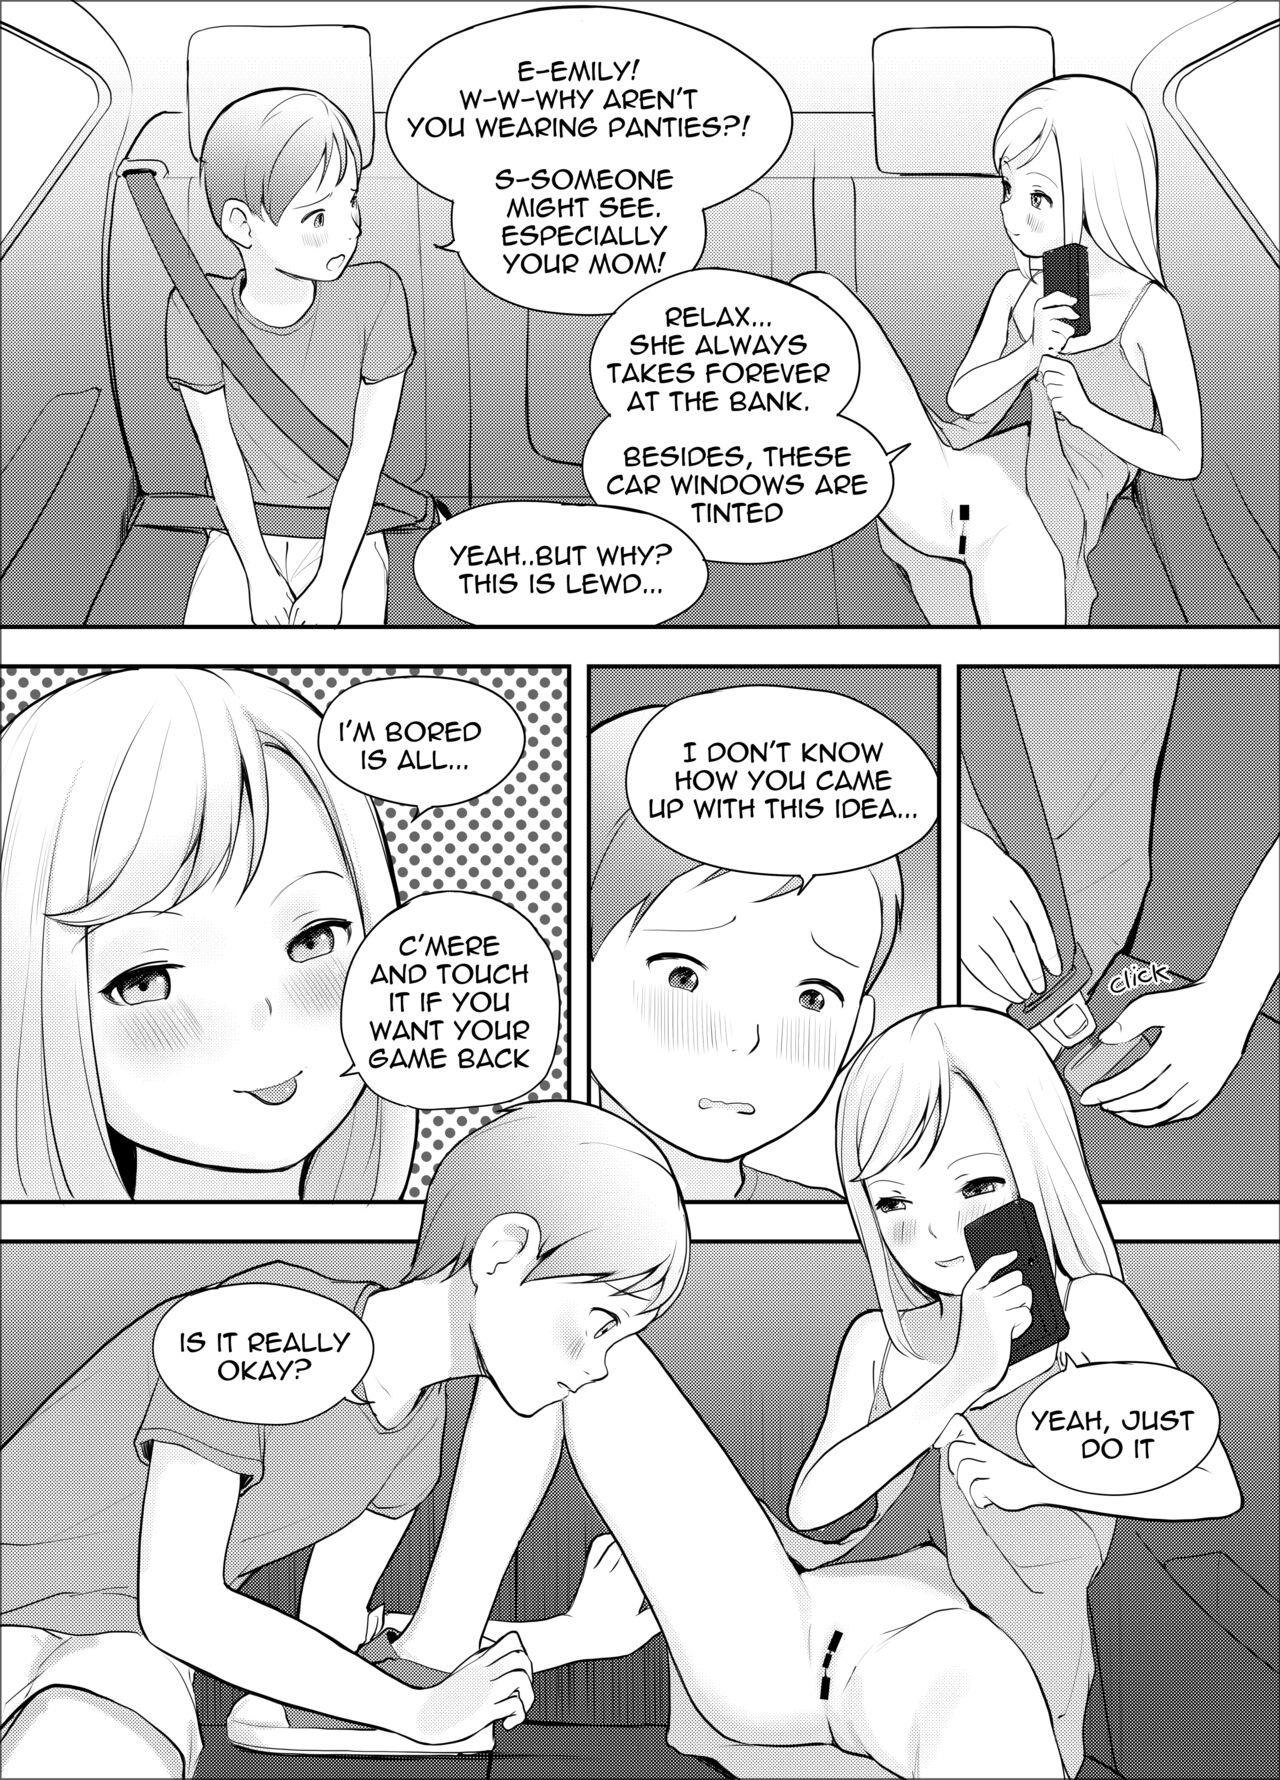 Shorts Passing the Time - Original Best Blow Jobs Ever - Page 5